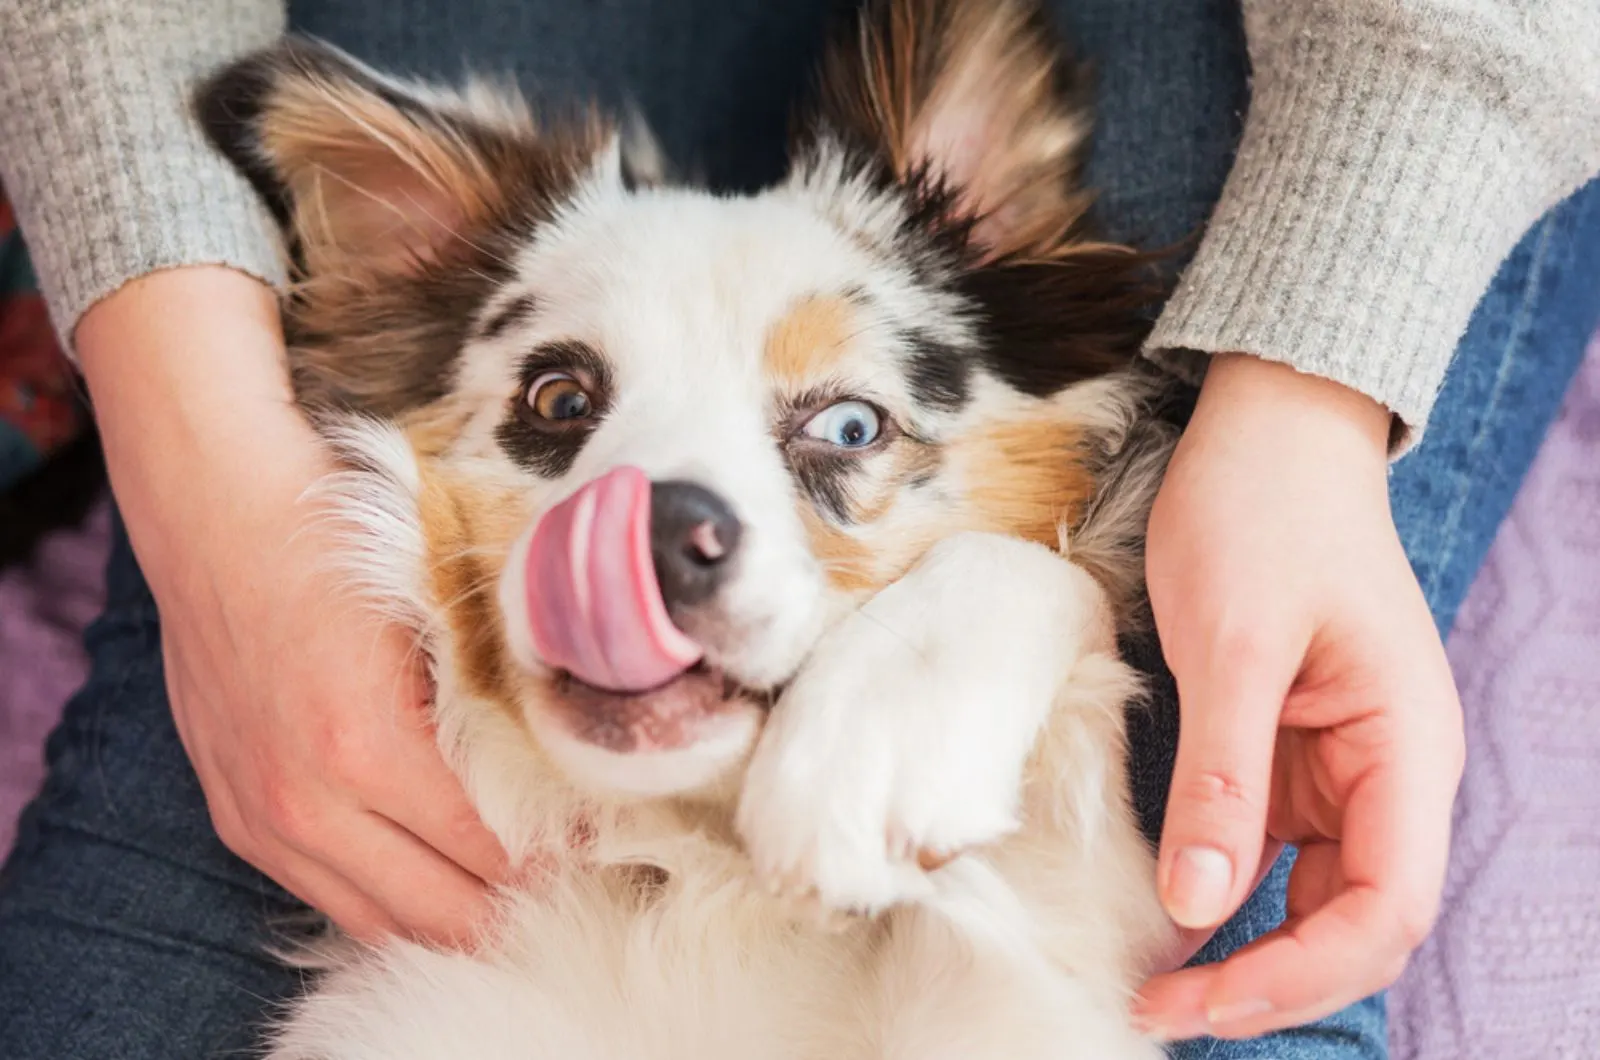 australian shepherd lying upside down and licking her nose in owner's lap